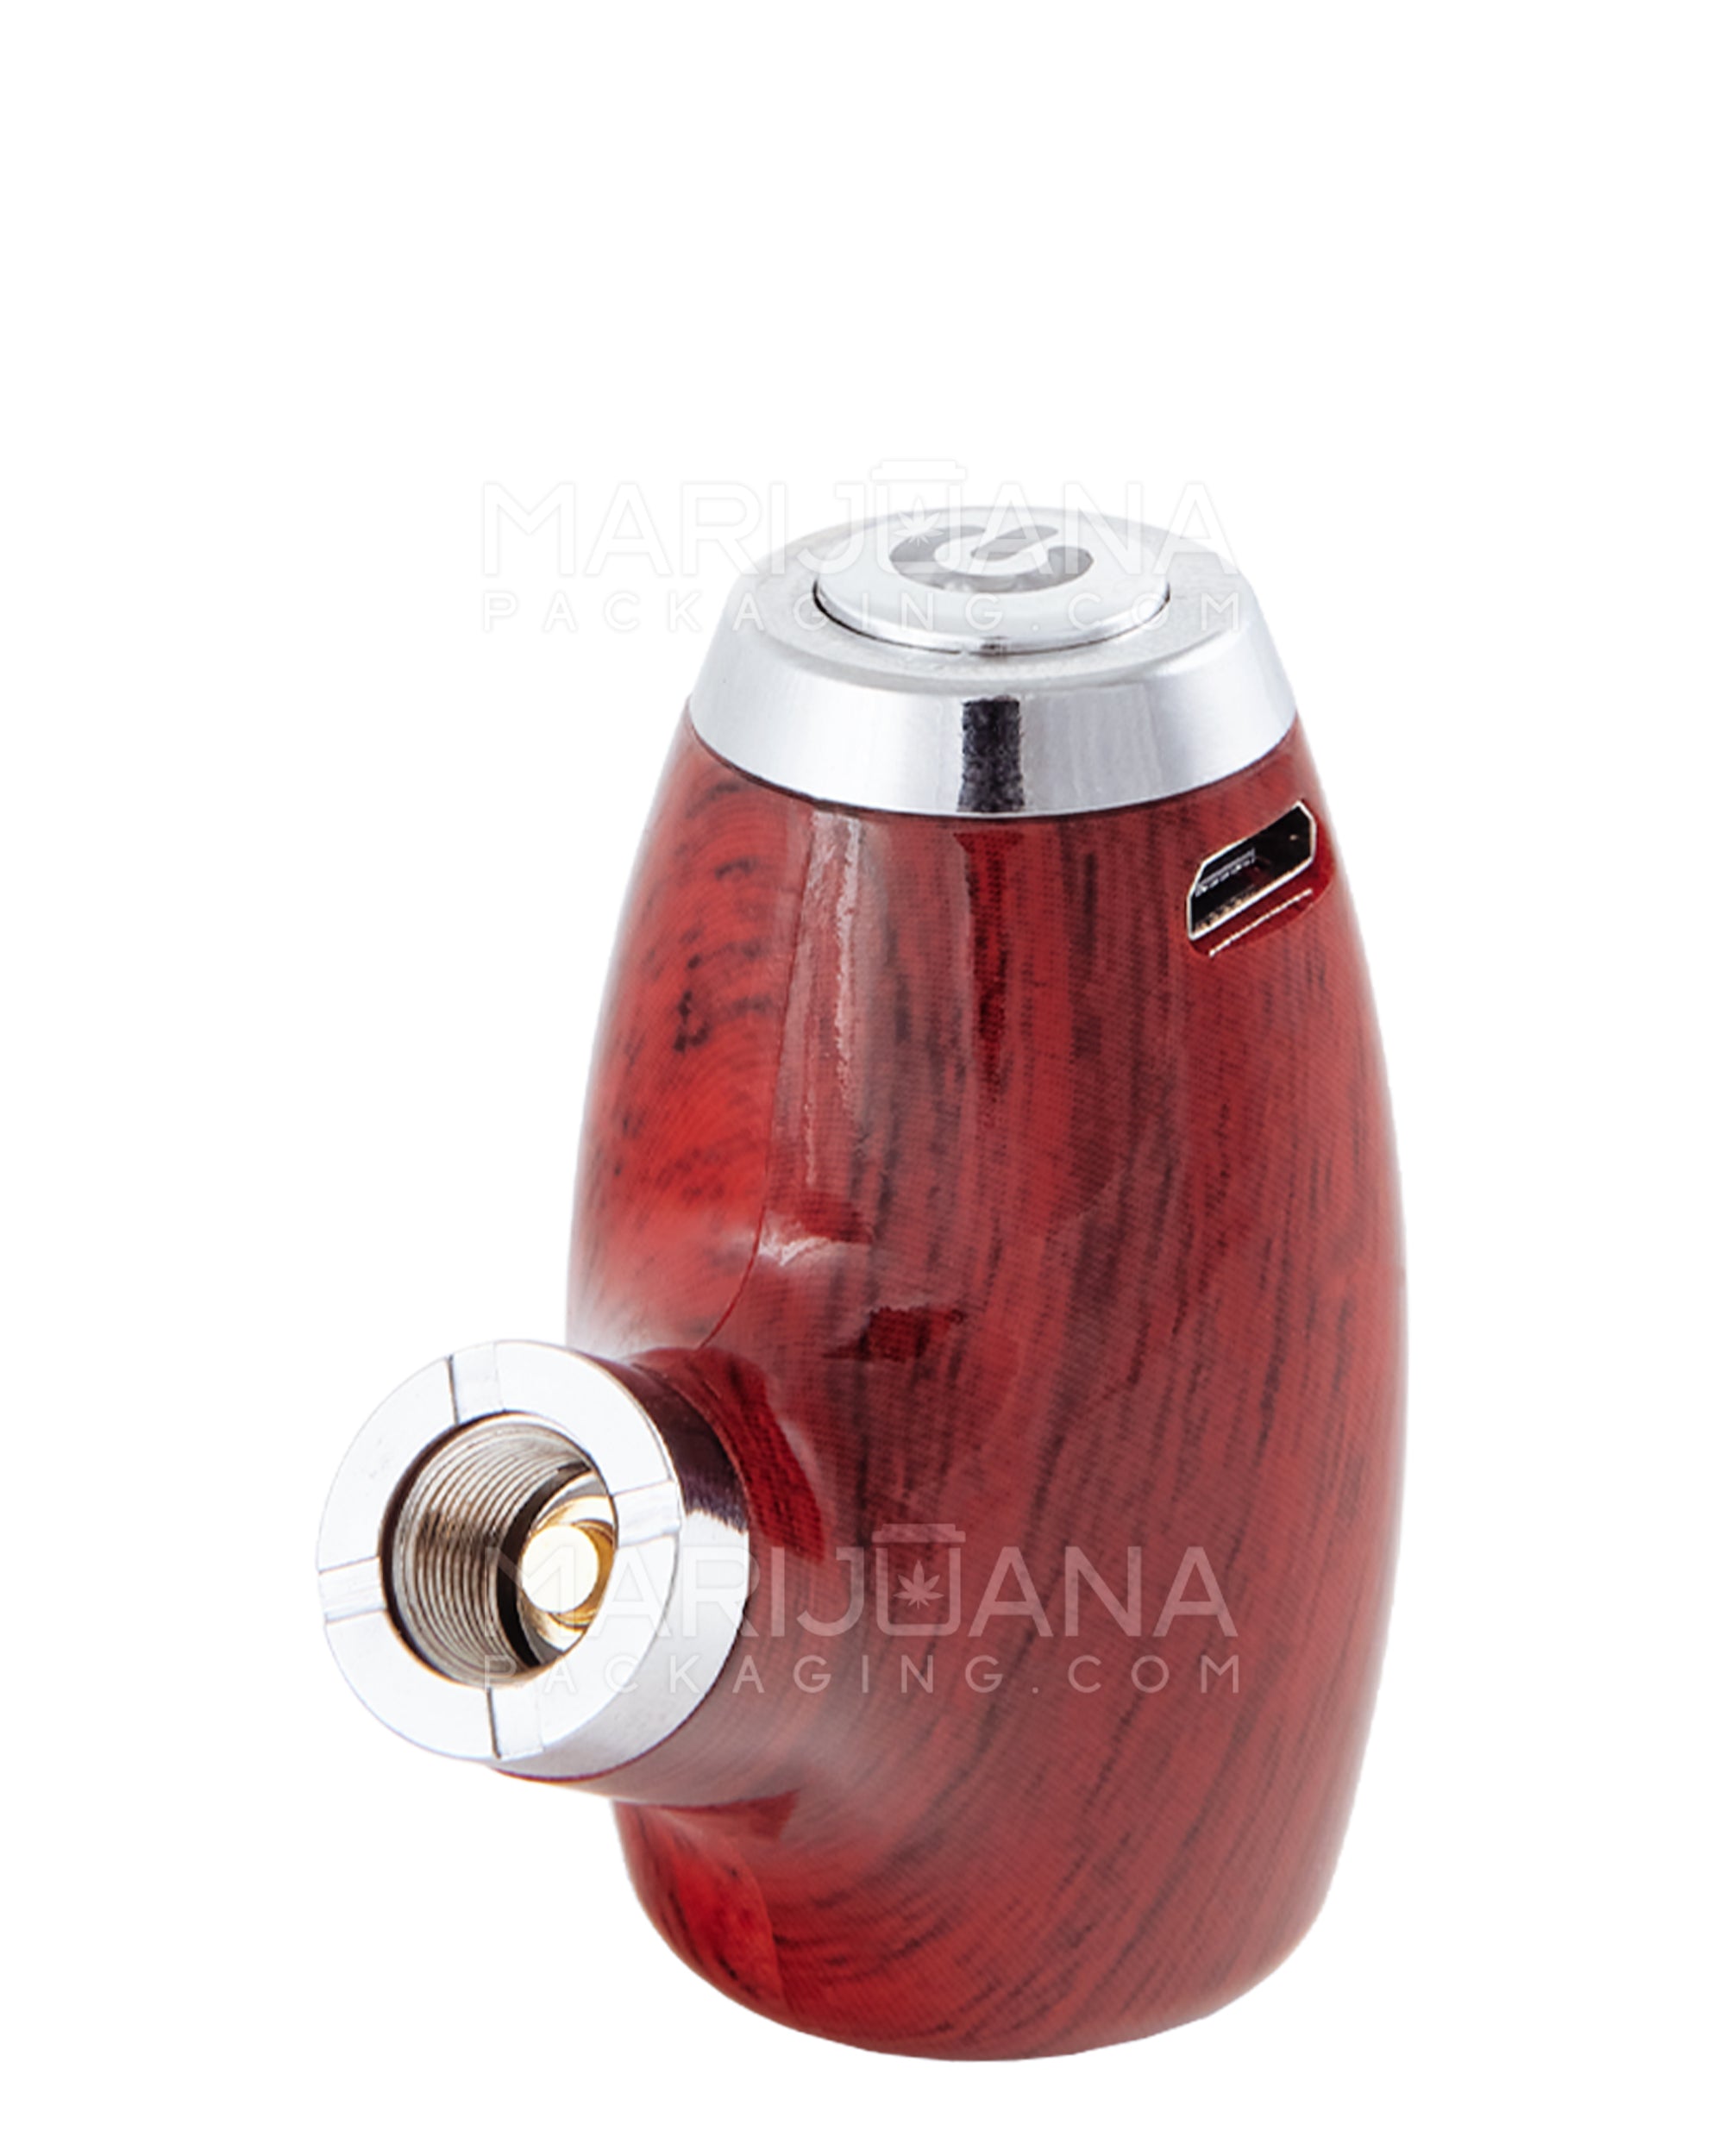 Variable Voltage "Old Man's Pipe" Shaped Vape Cartridge Battery | 900mah - Redwood Wood - 510 Thread - 6